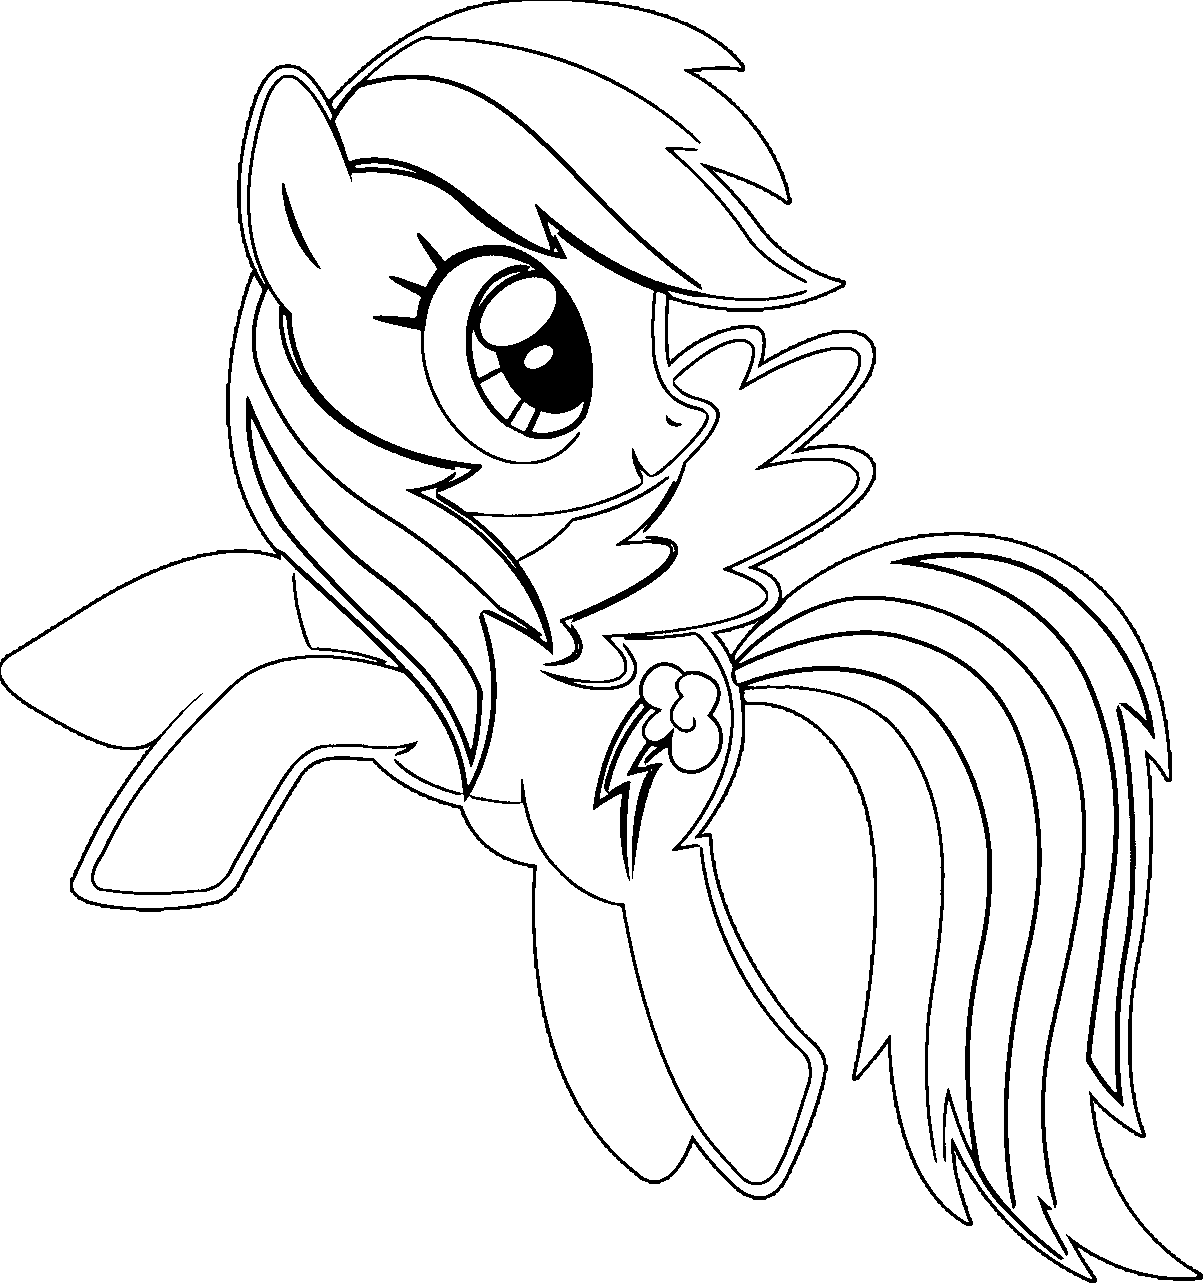 rainbow dash coloring sheets rainbow dash coloring pages to download and print for free sheets dash rainbow coloring 